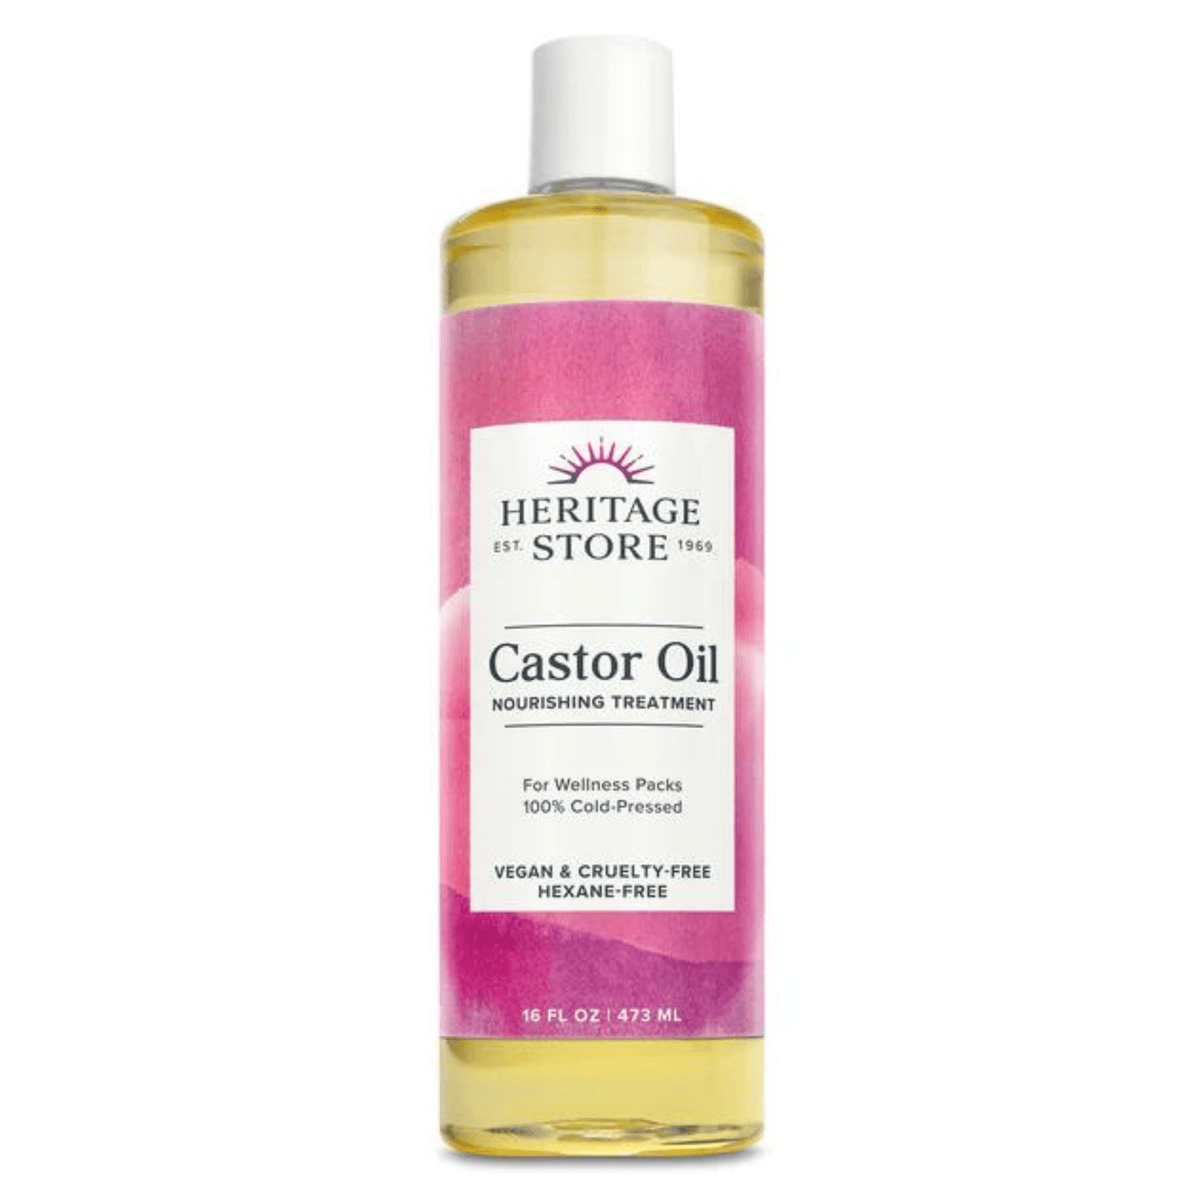 Primary Image of Castor Oil